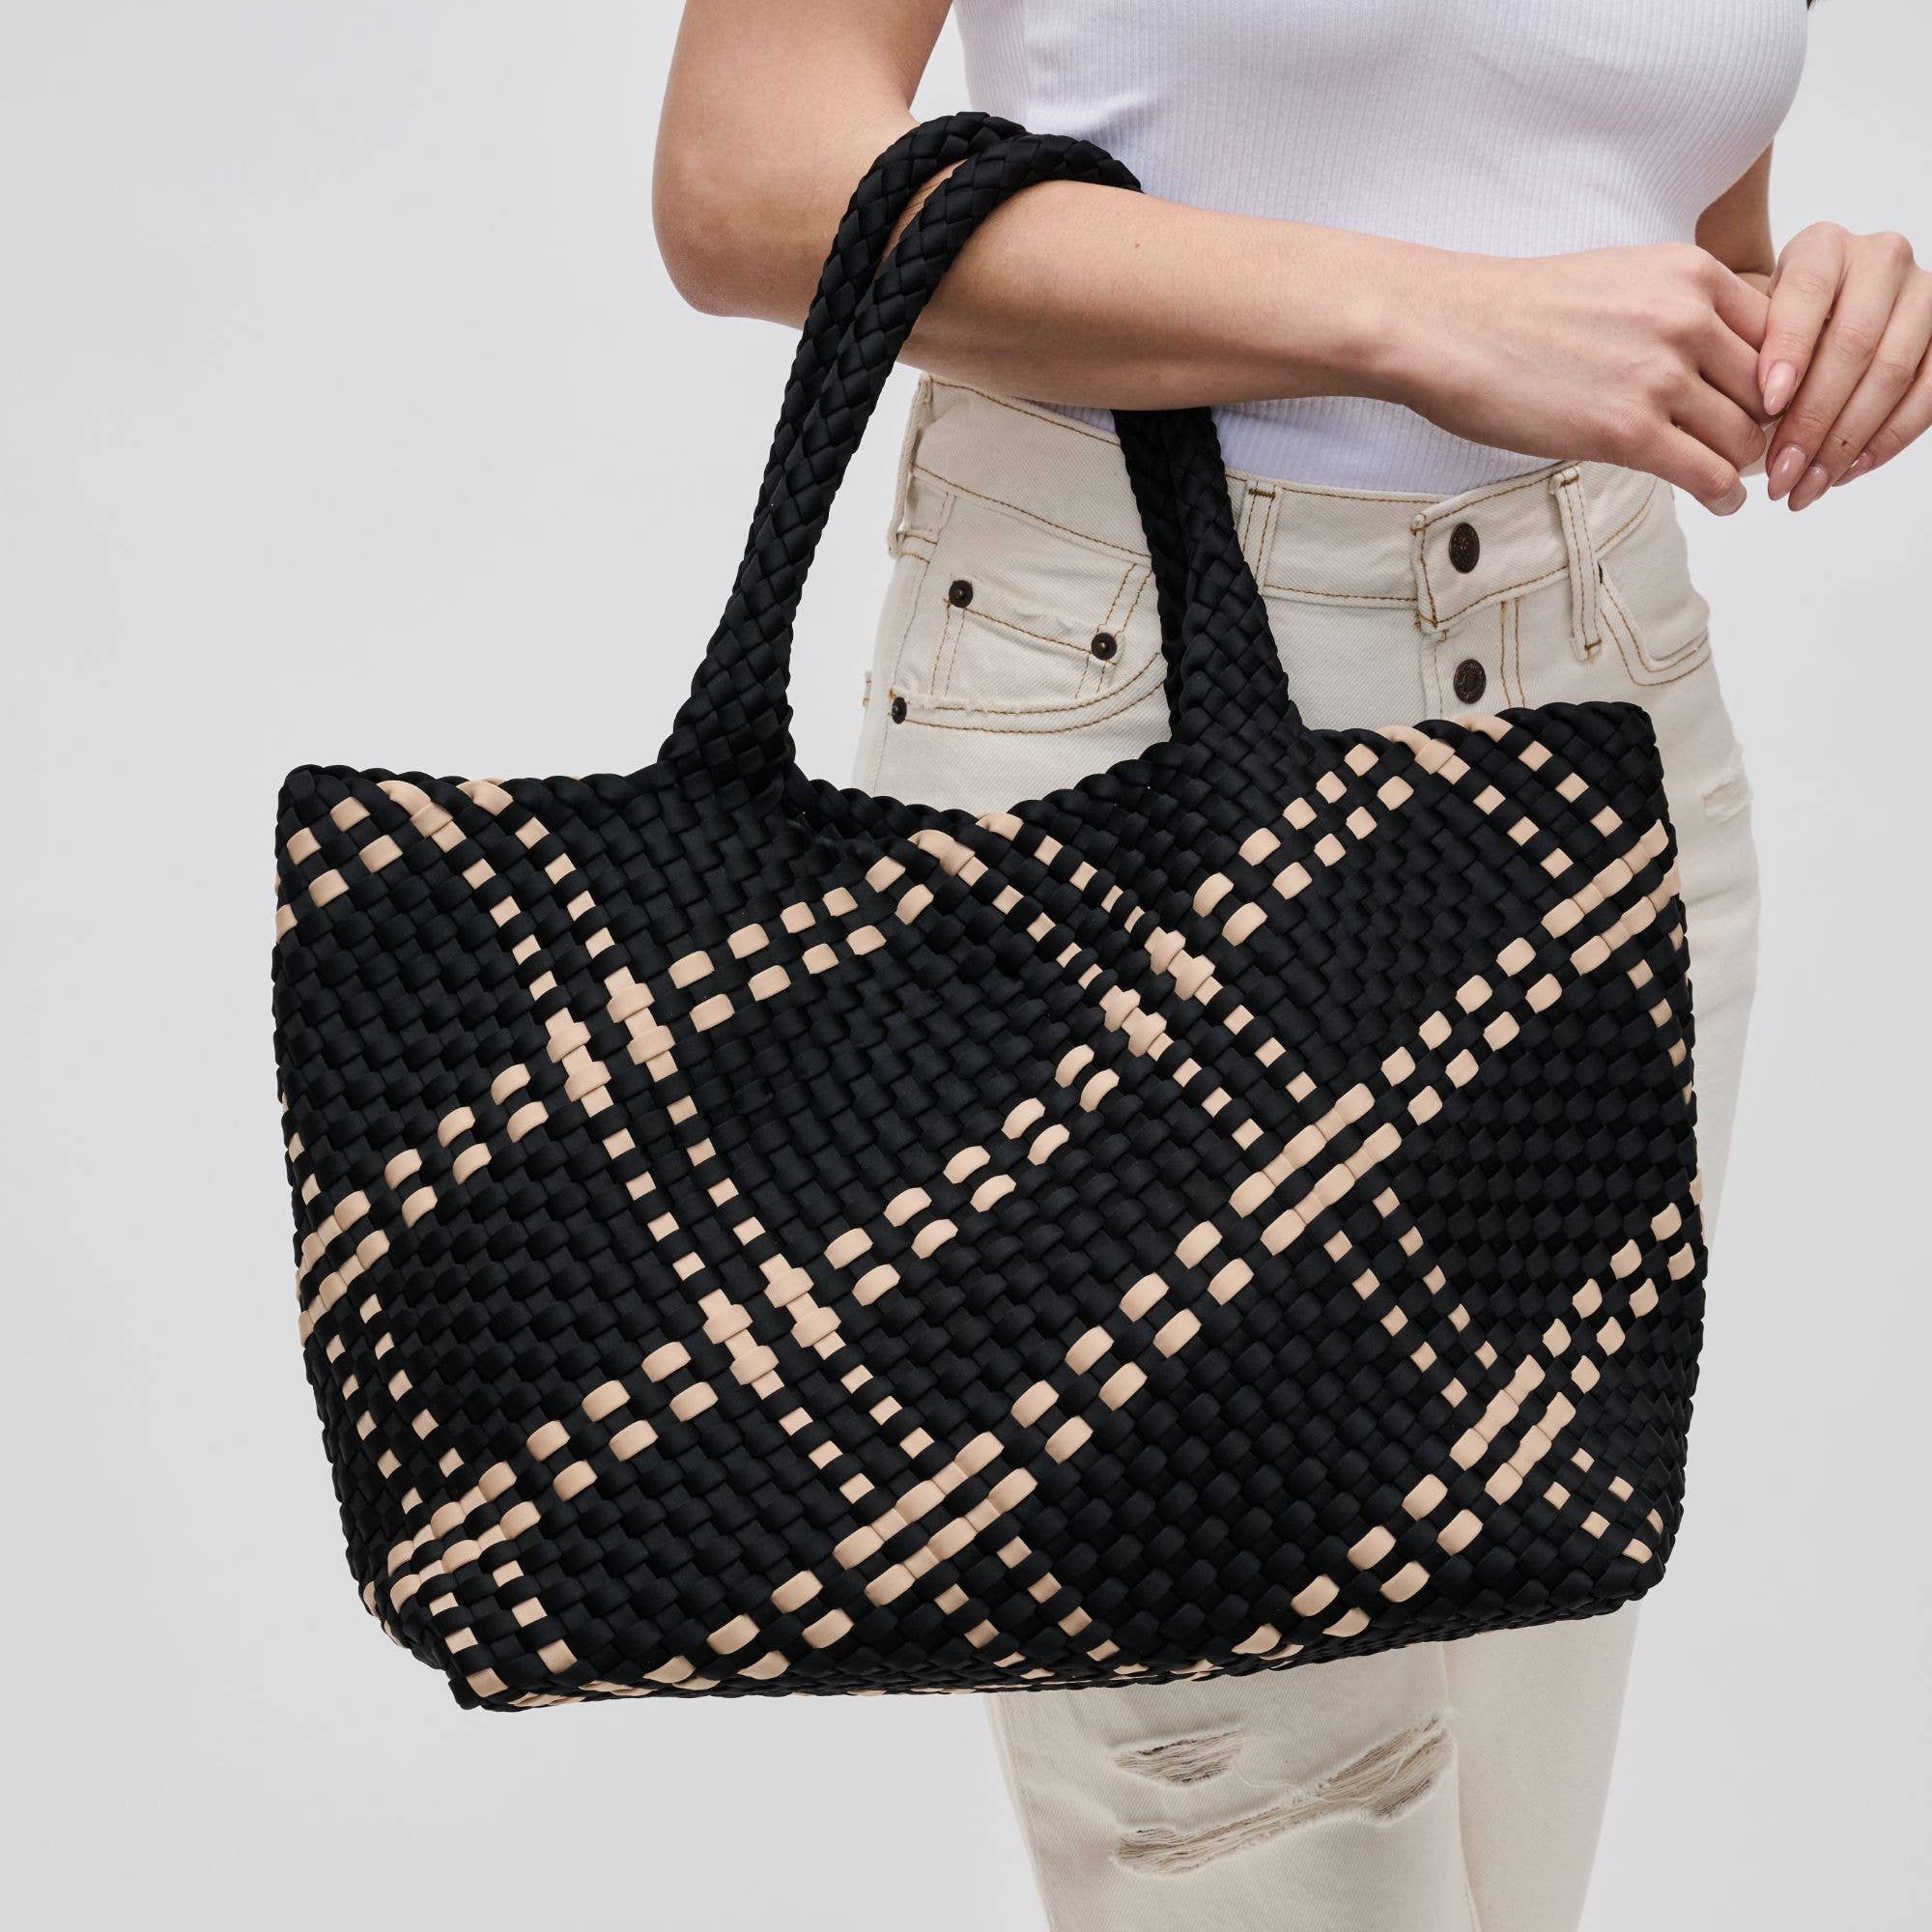 Allons Y Tote - Large Woven Neoprene Tote: Black & Nude